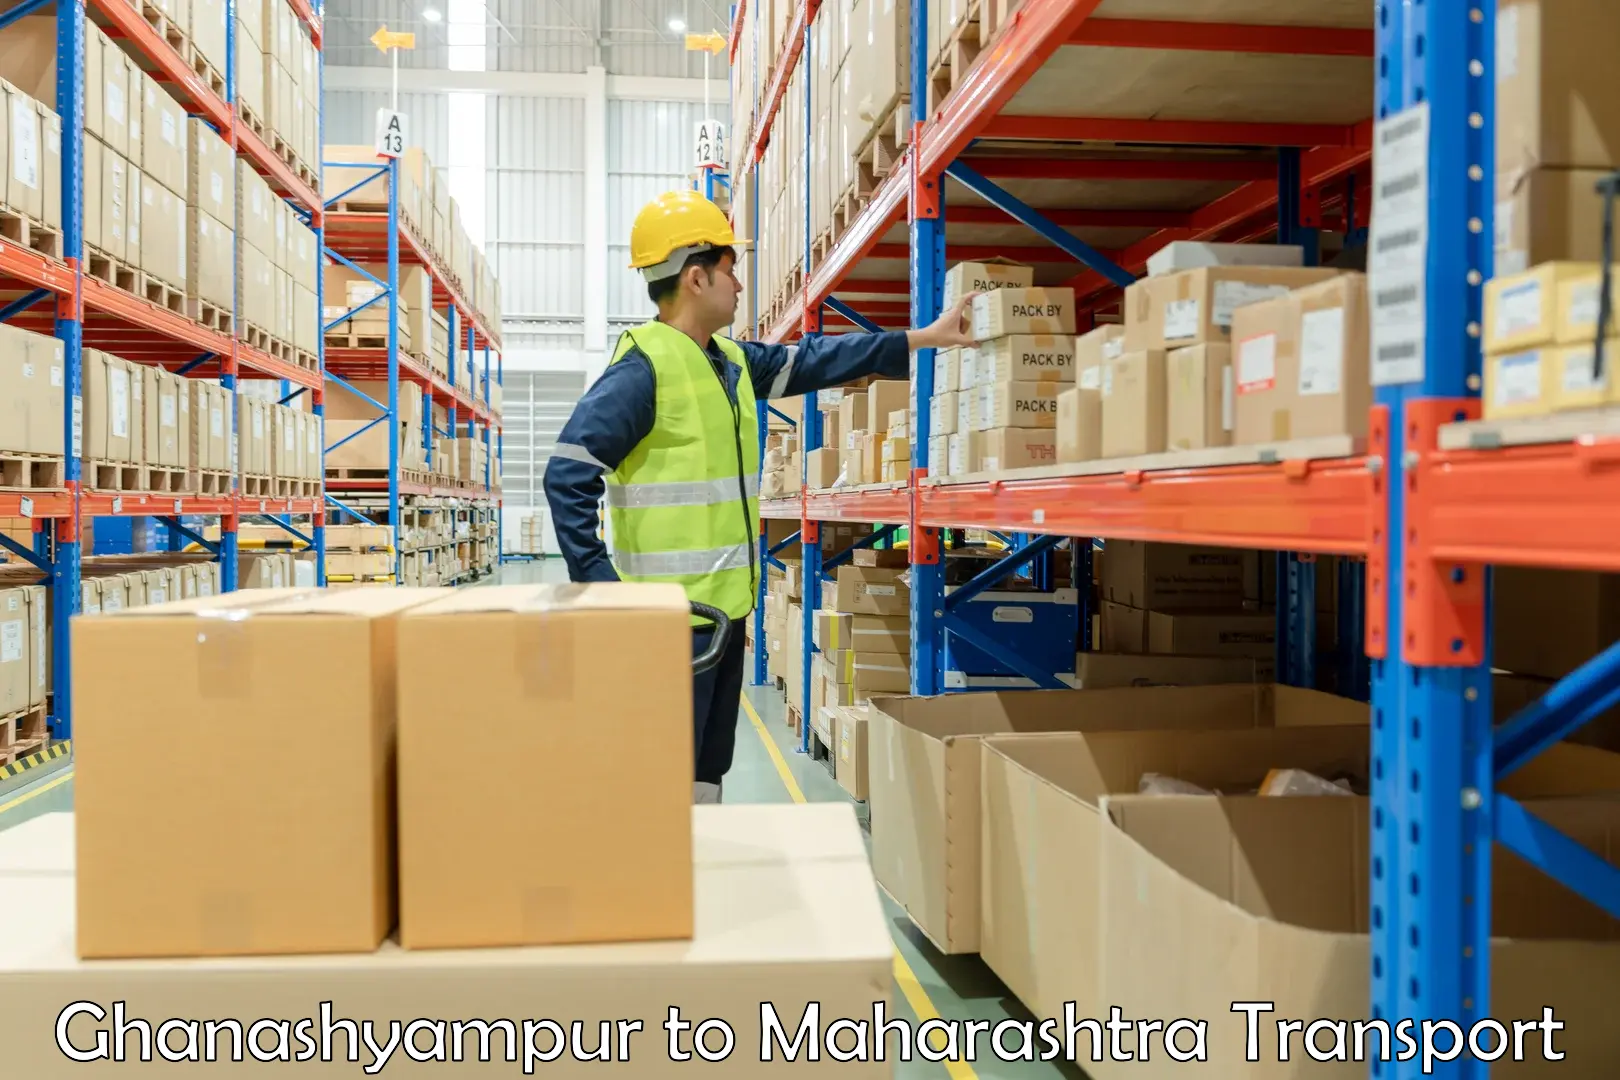 Air cargo transport services in Ghanashyampur to Alephata